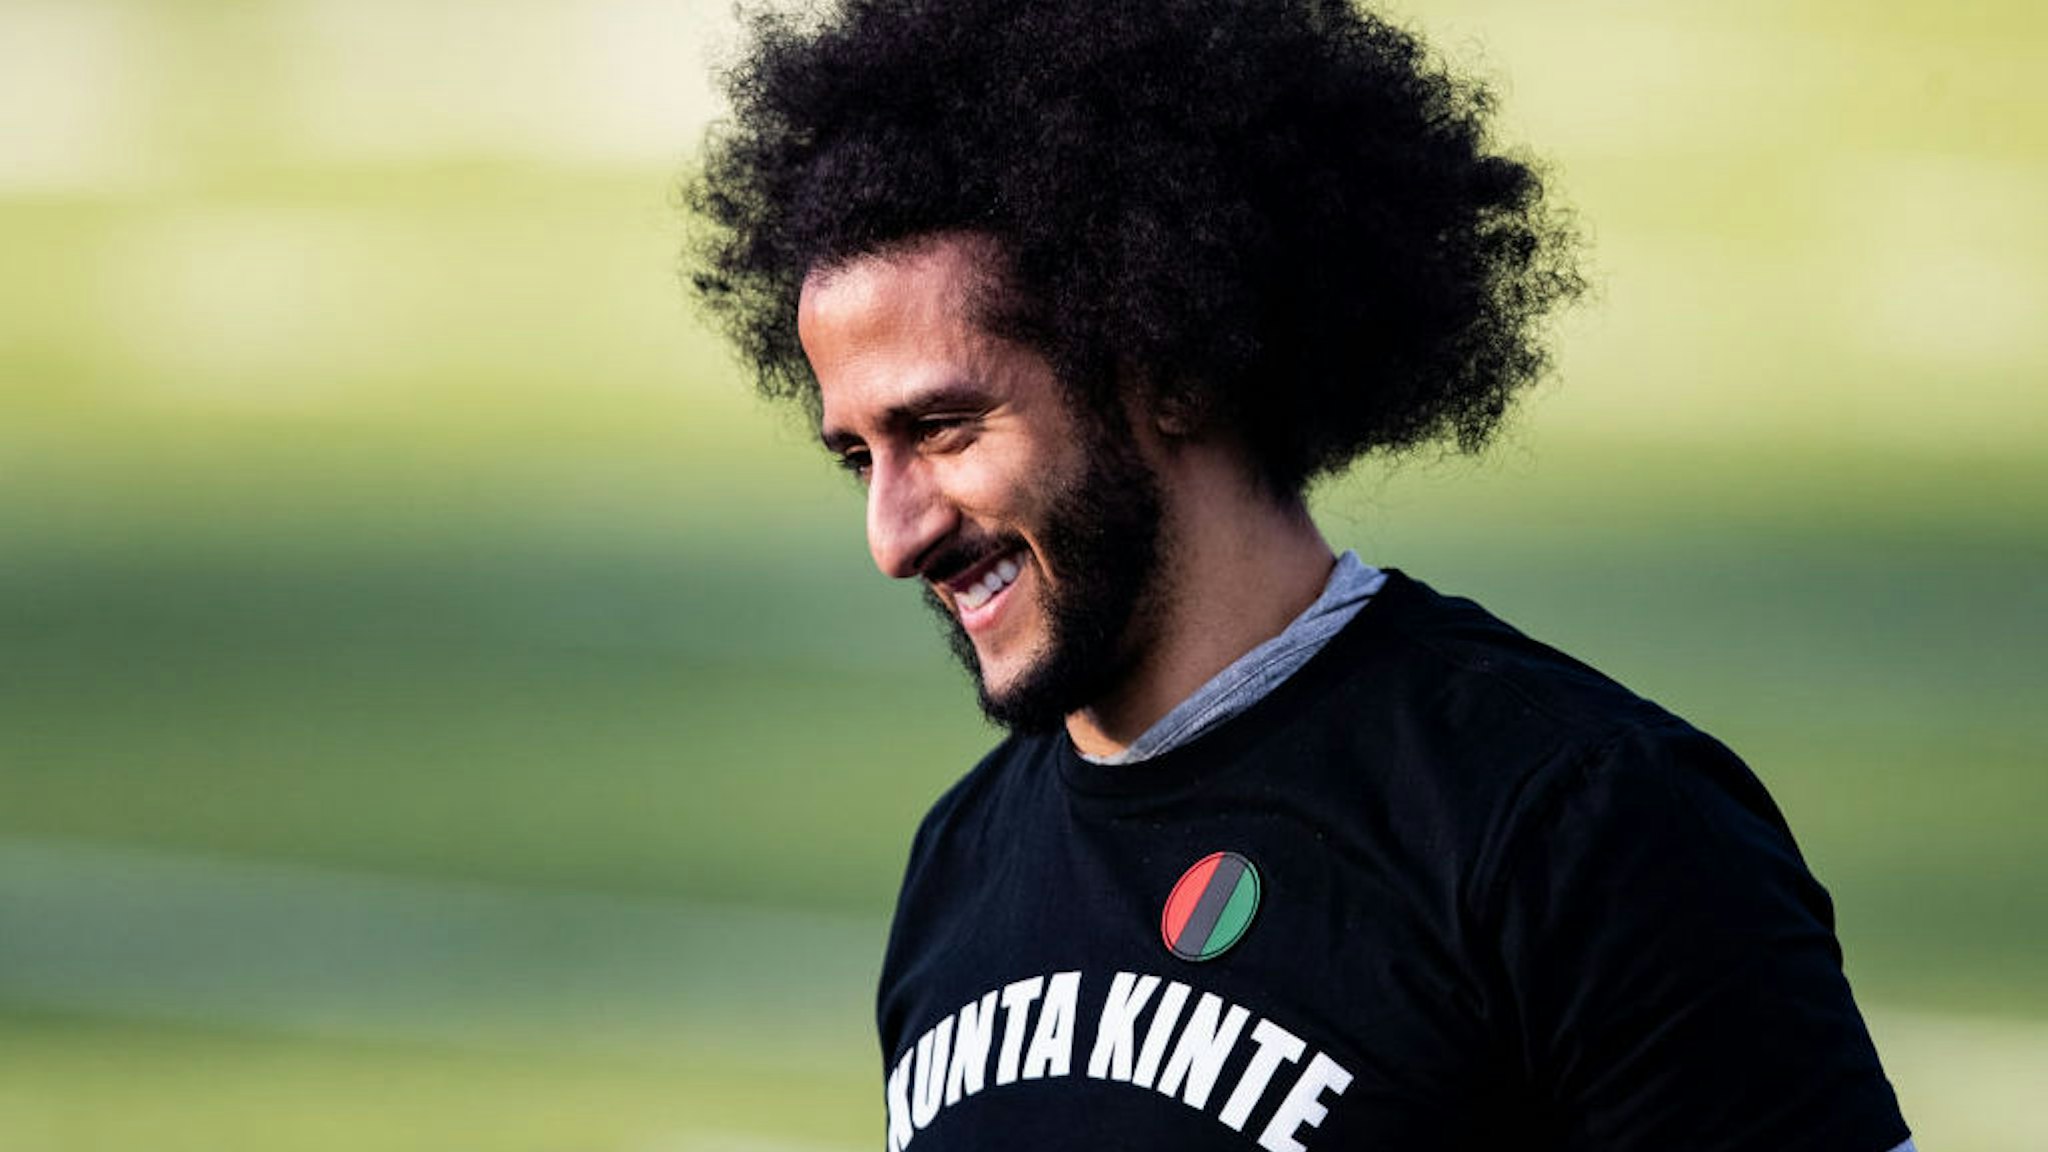 Colin Kaepernick looks on during his NFL workout held at Charles R Drew high school on November 16, 2019 in Riverdale, Georgia. (Photo by Carmen Mandato/Getty Images)